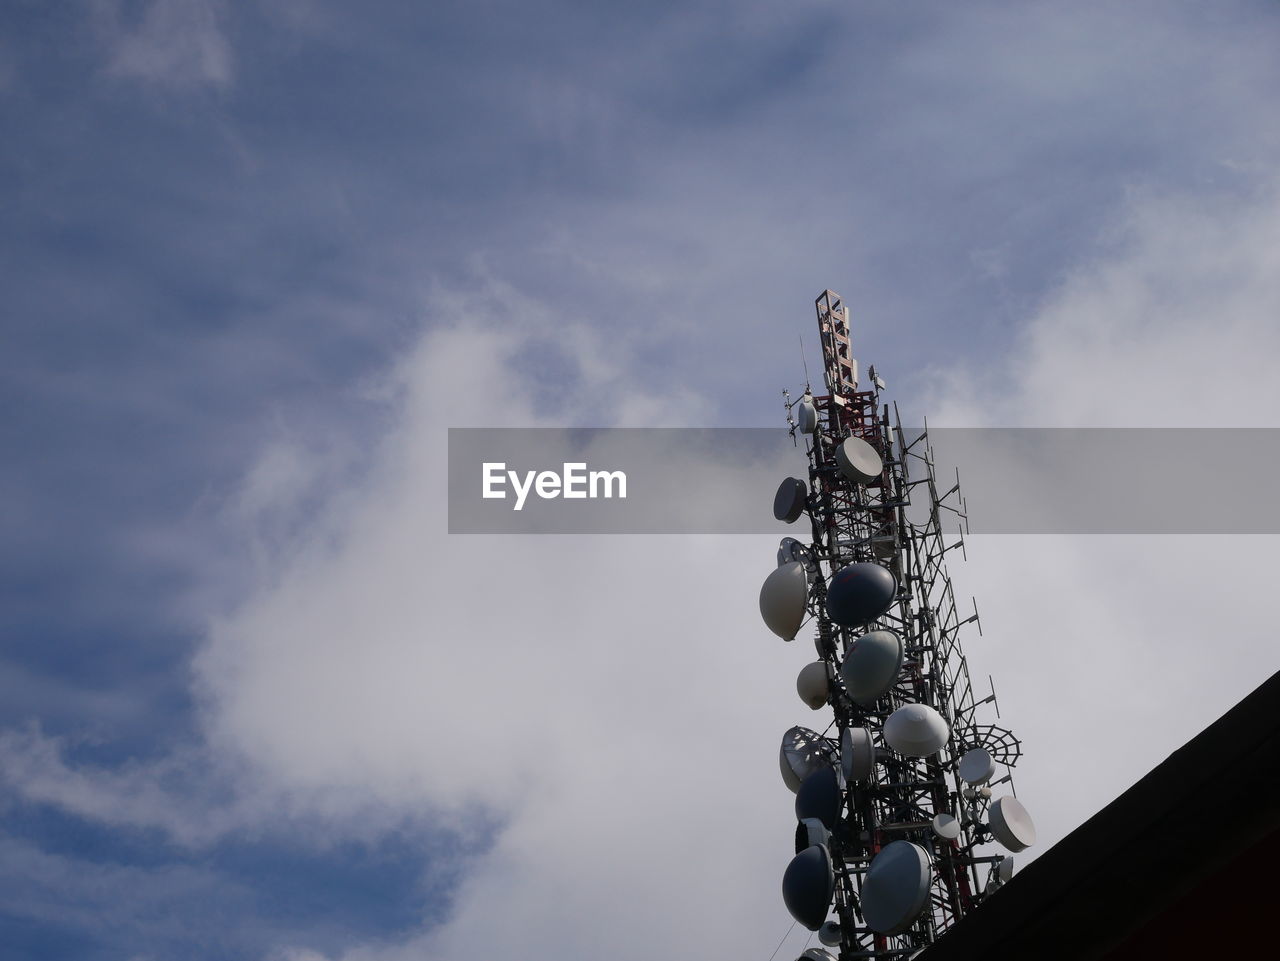 LOW ANGLE VIEW OF COMMUNICATIONS TOWER